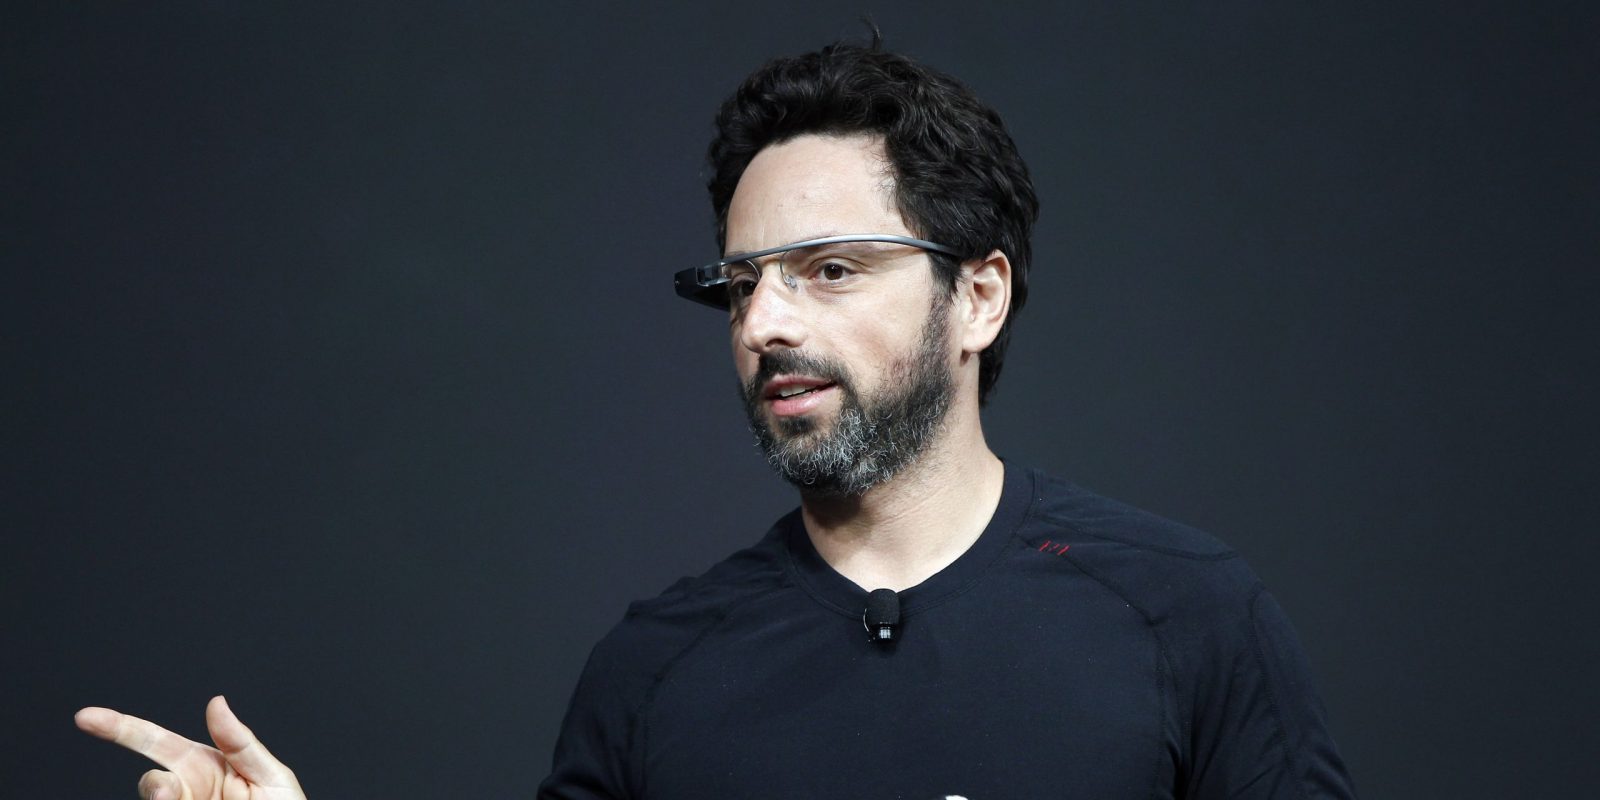 "If we were motivated by money, we would have sold the company a long time ago and ended up on a beach." The rules of life and leadership of Google co-founder Sergey Brin